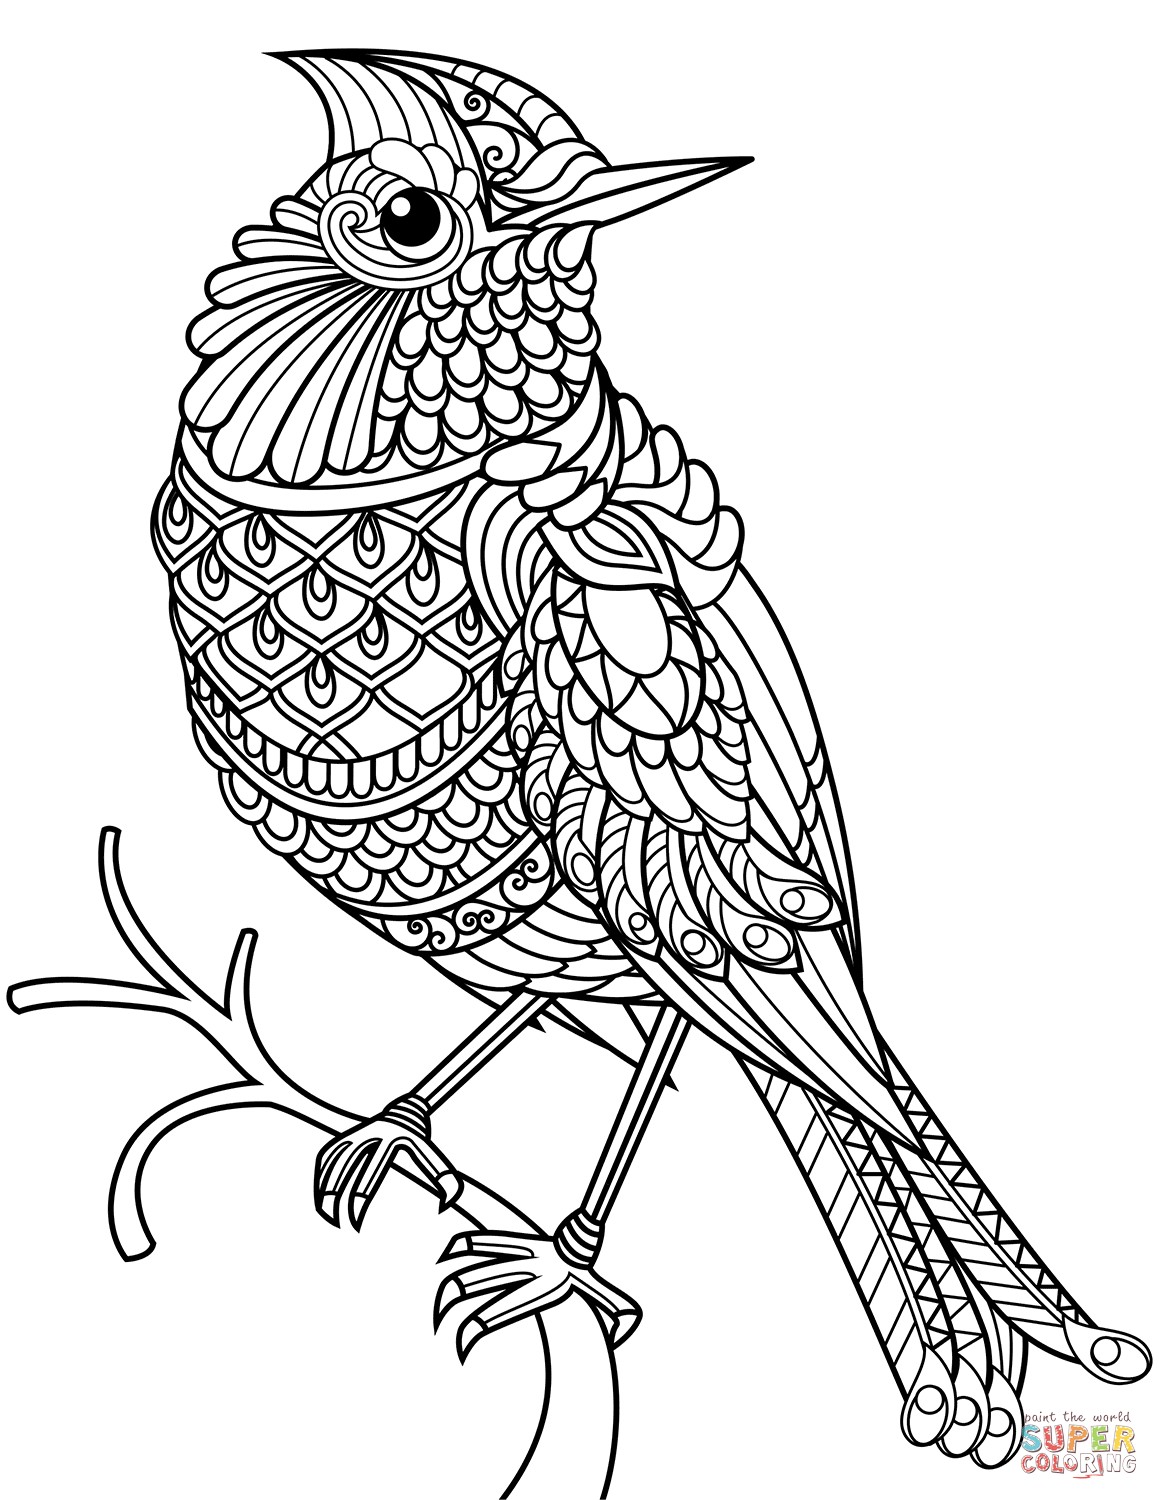 Birds And Flowers Coloring Pages at GetColorings.com | Free printable